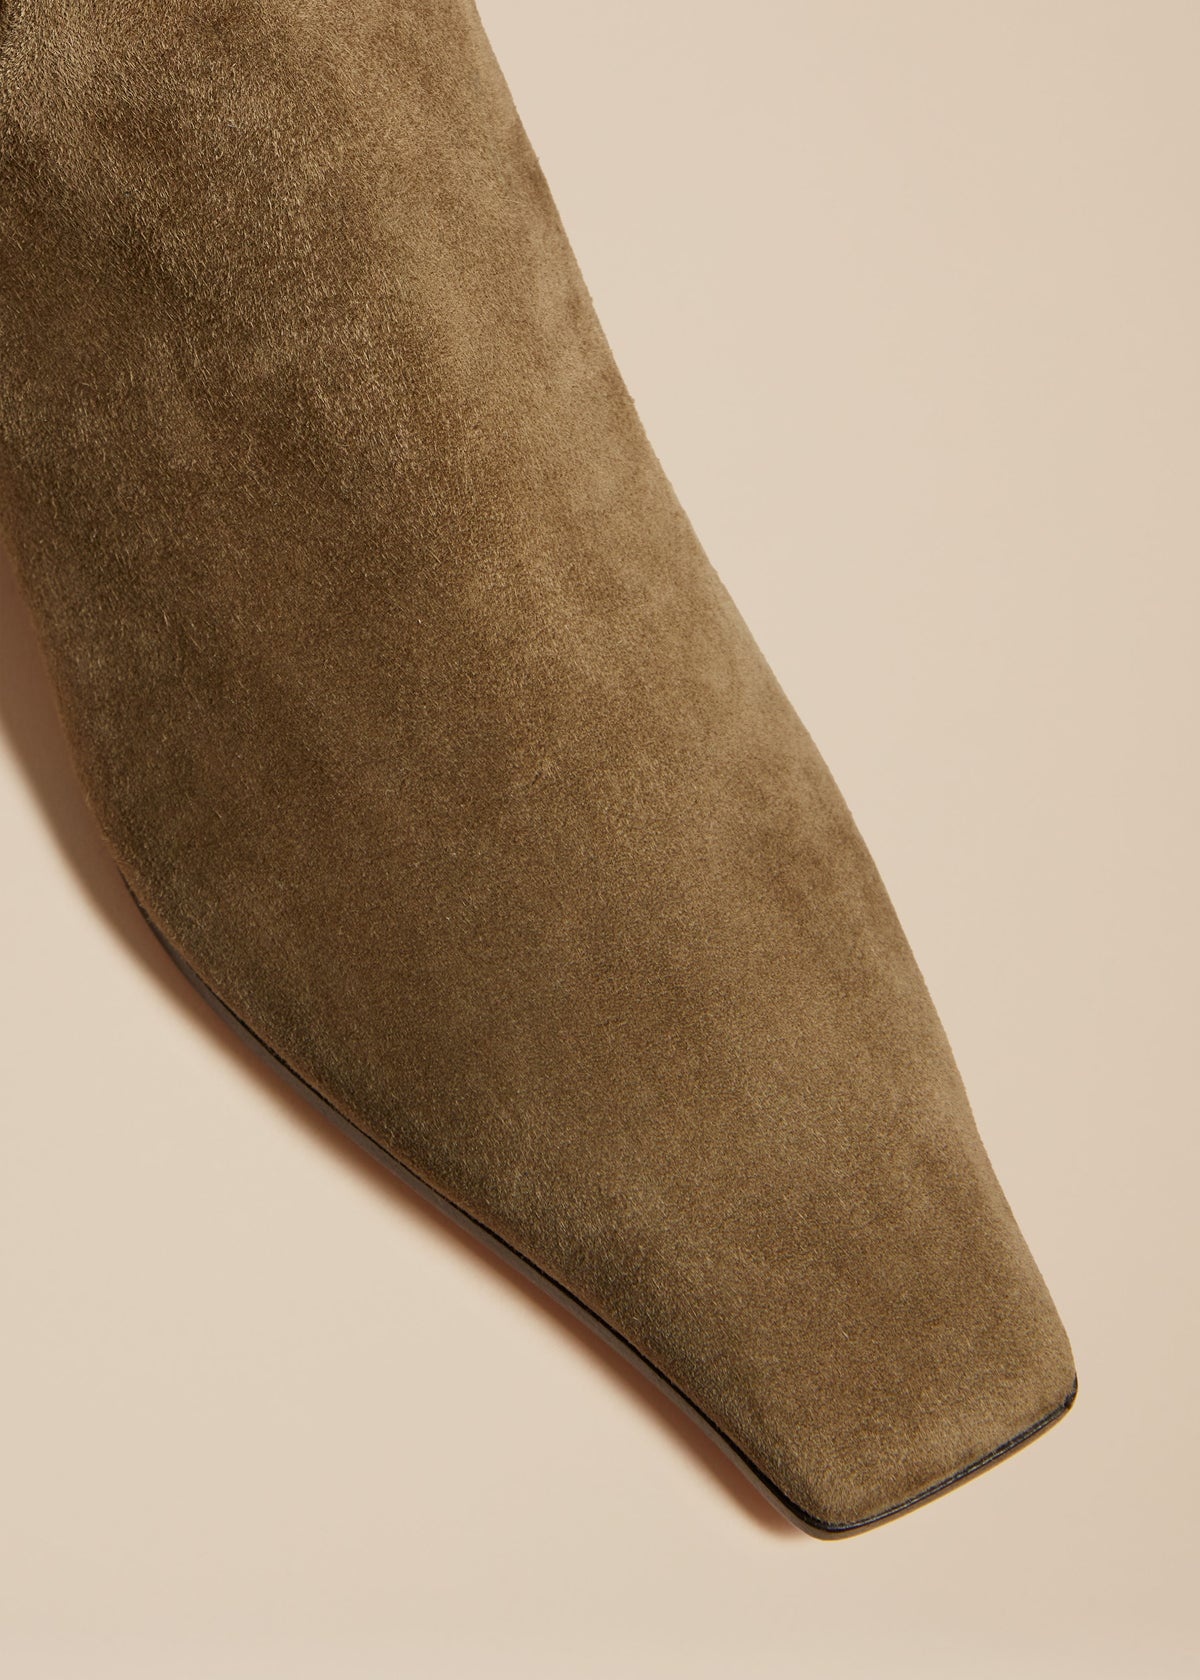 The Marfa Ankle Boot in Khaki Suede - 3